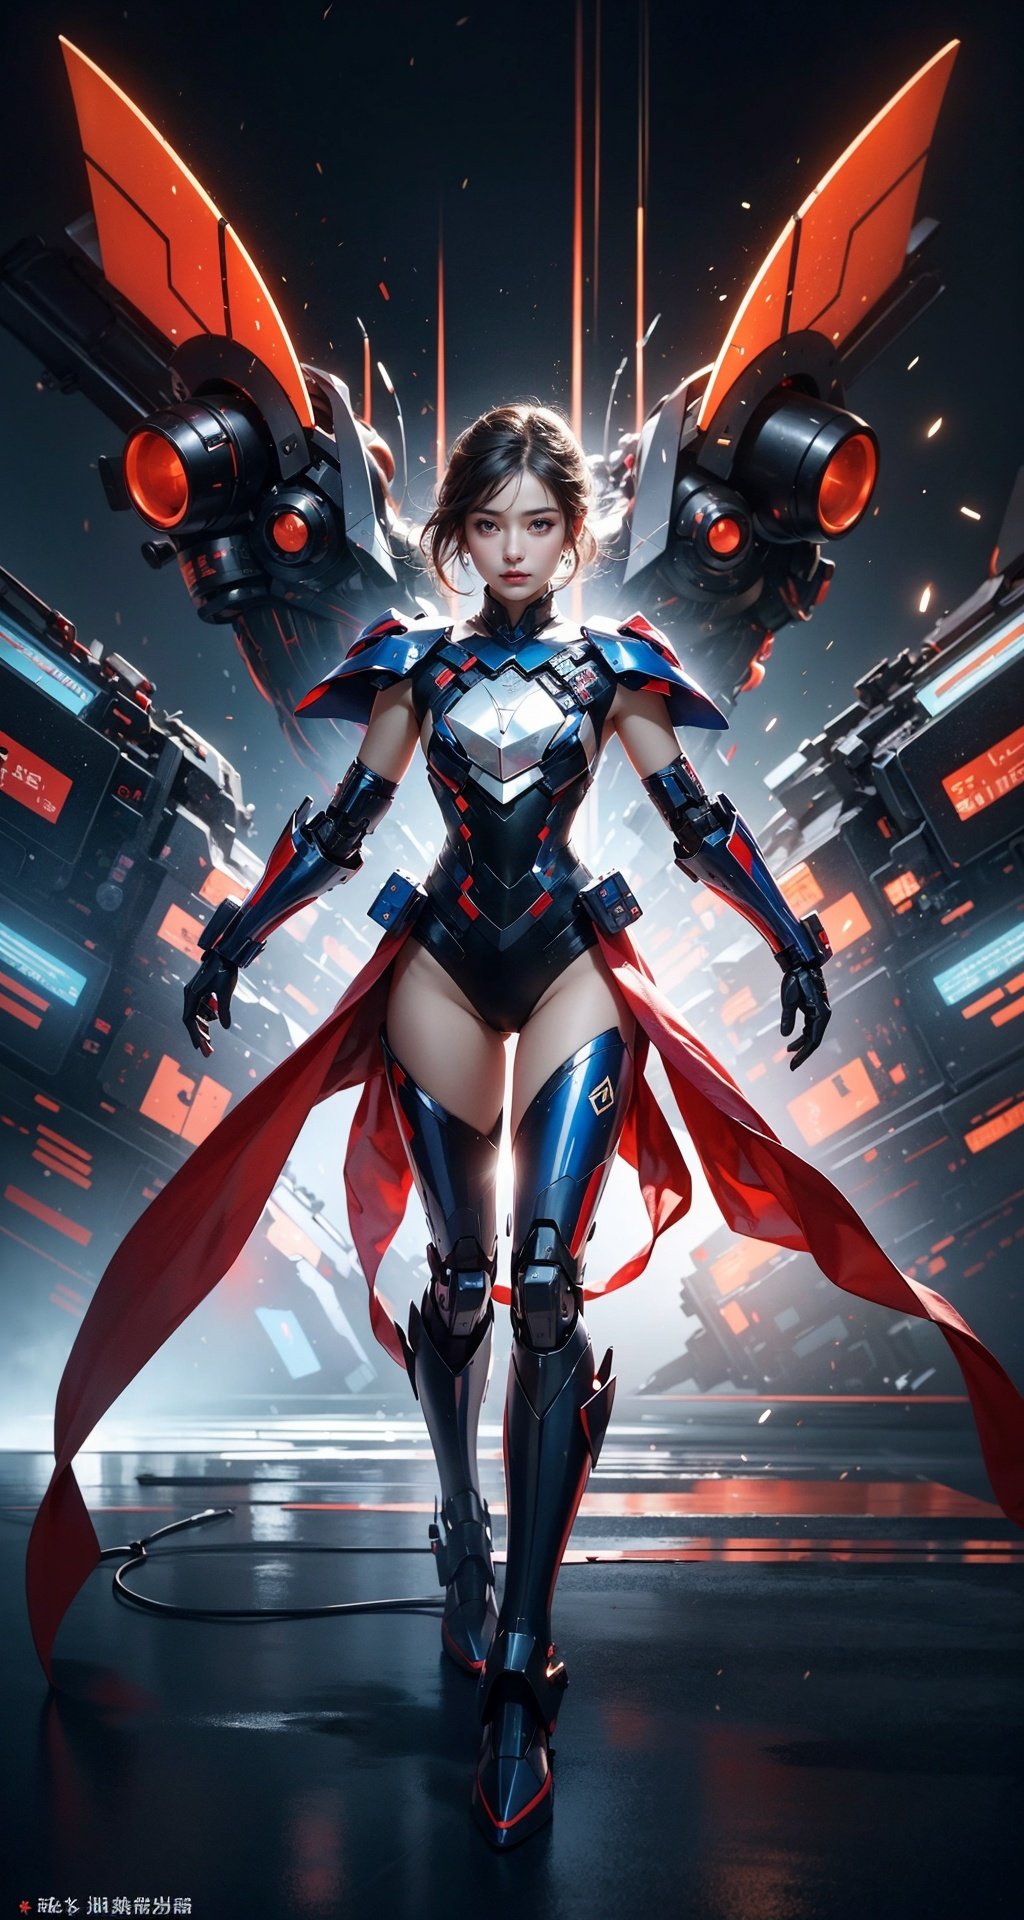 masterpiece,best quality,official art,highly realistic,1girl,full body mecha,folding fan,glass folding fan,delicate and lovely face,blue and red and white mecha,(glassy translucence:1.3),graceful poses,blink-and-you-miss-it detail,Sci-fi light effects,(Illuminated circuit board),,armor,flying hair,
